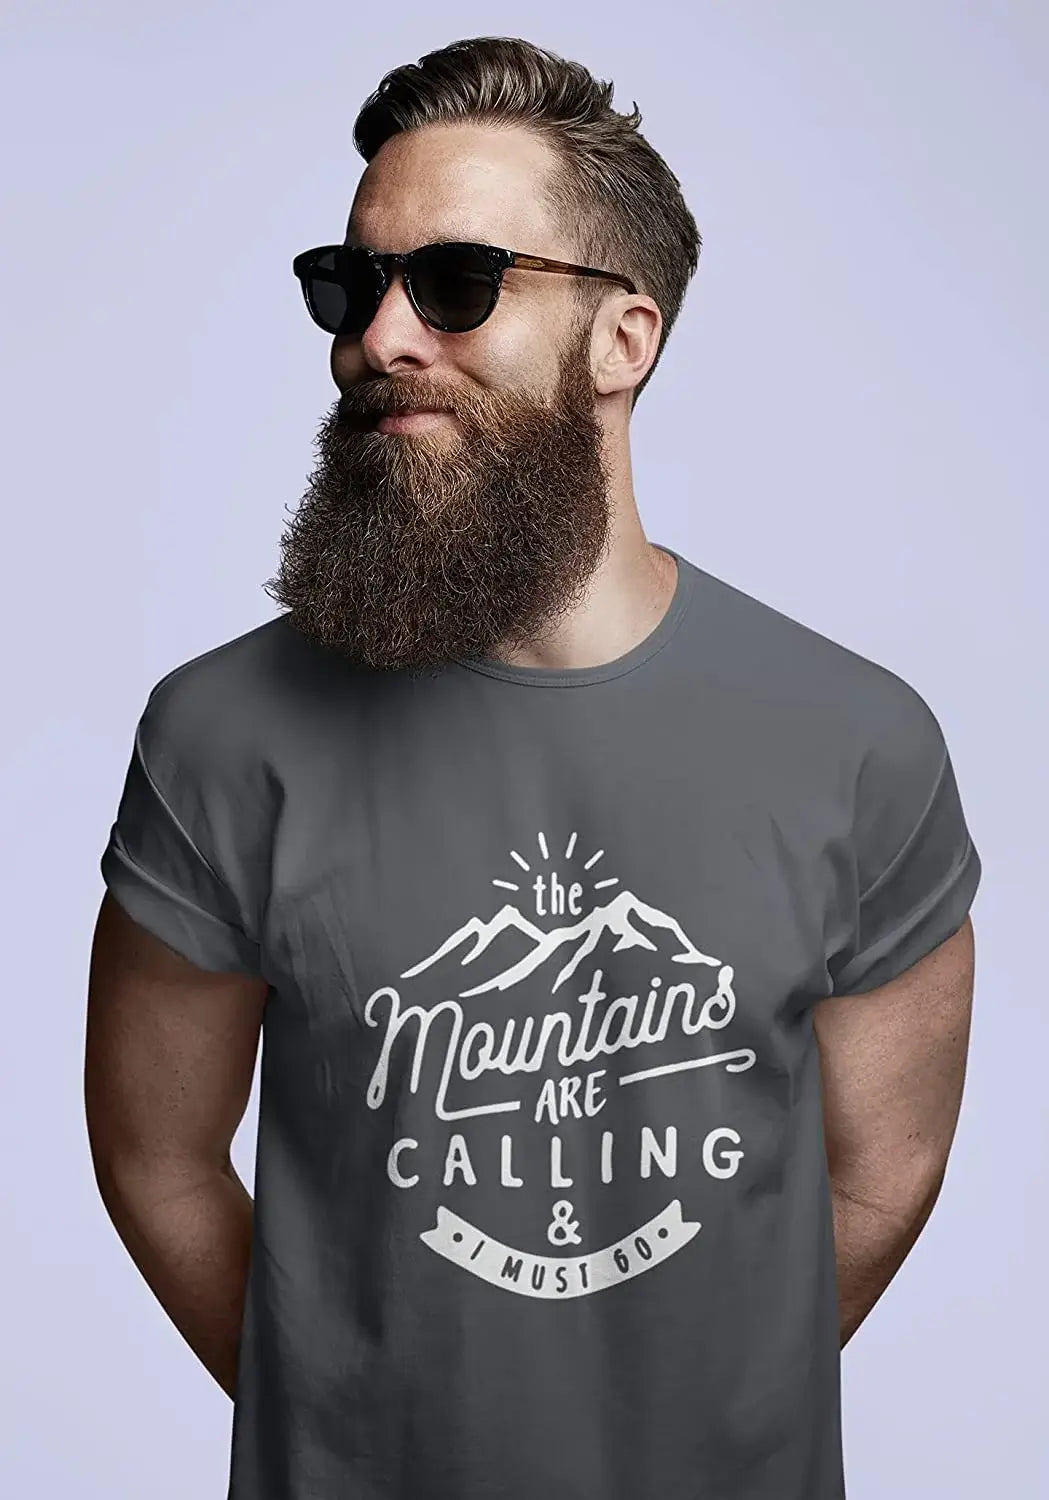 ULTRABASIC - Graphic Printed Men's The Mountains Are Calling And I Must Go Hiking Tee White